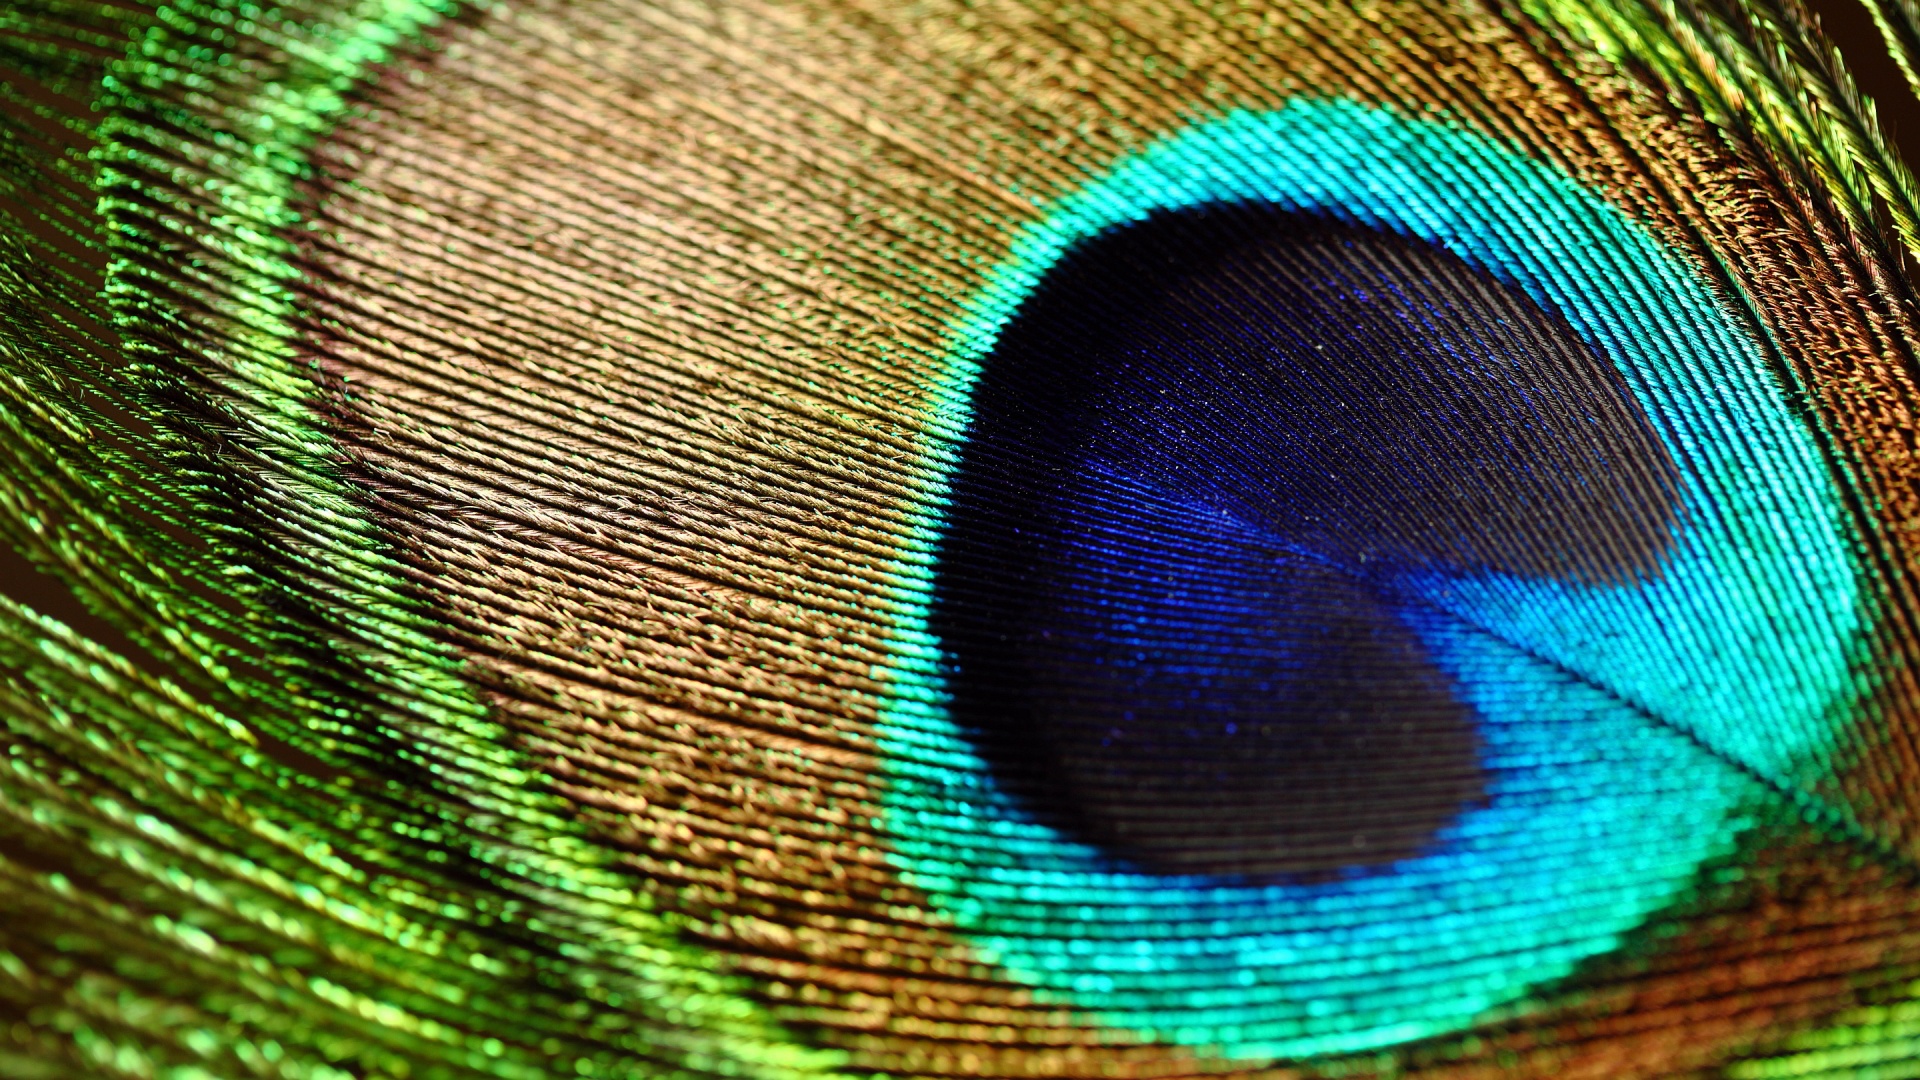 Peacock Feathers Wallpaper Live HD Hq Pictures Image